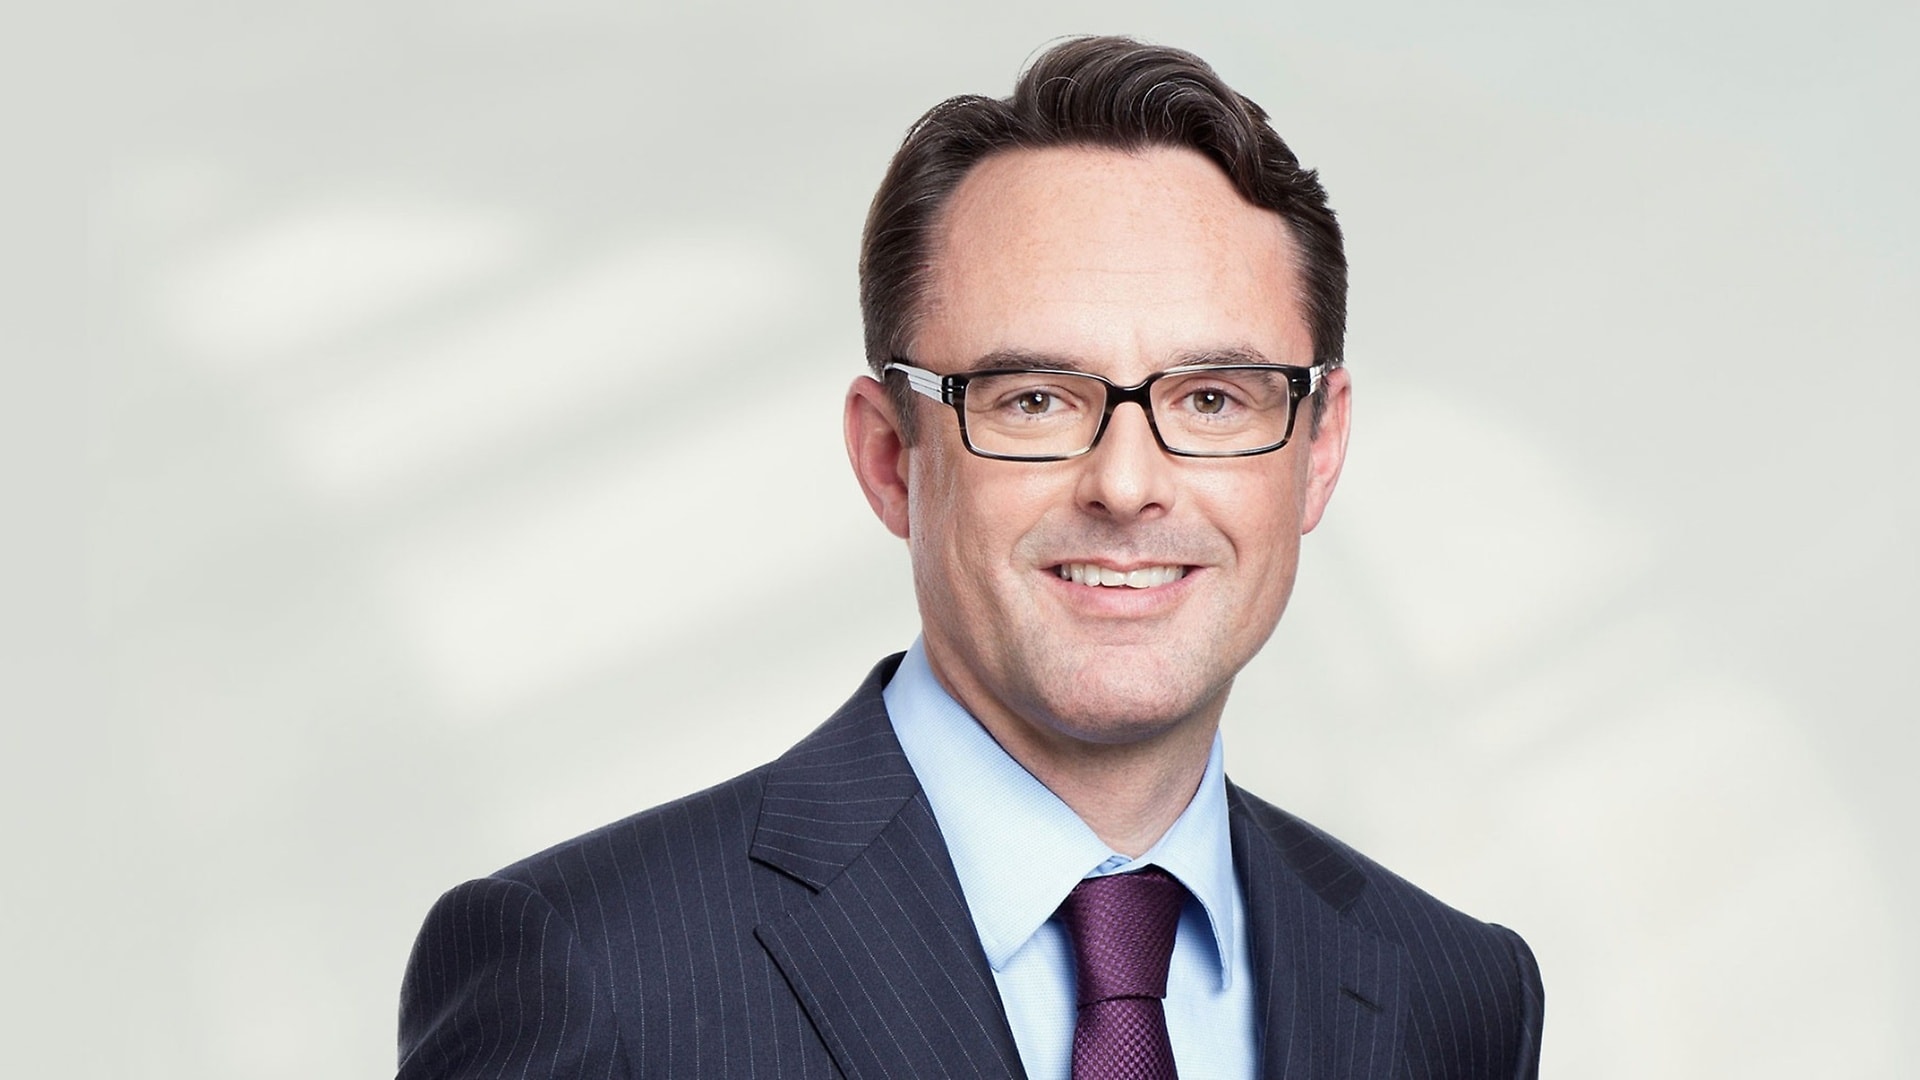 Steffen Hoffmann to take over as Head of Treasury Daimler AG on 1 September 2021, in addition to his current position as Head of Investor Relations.